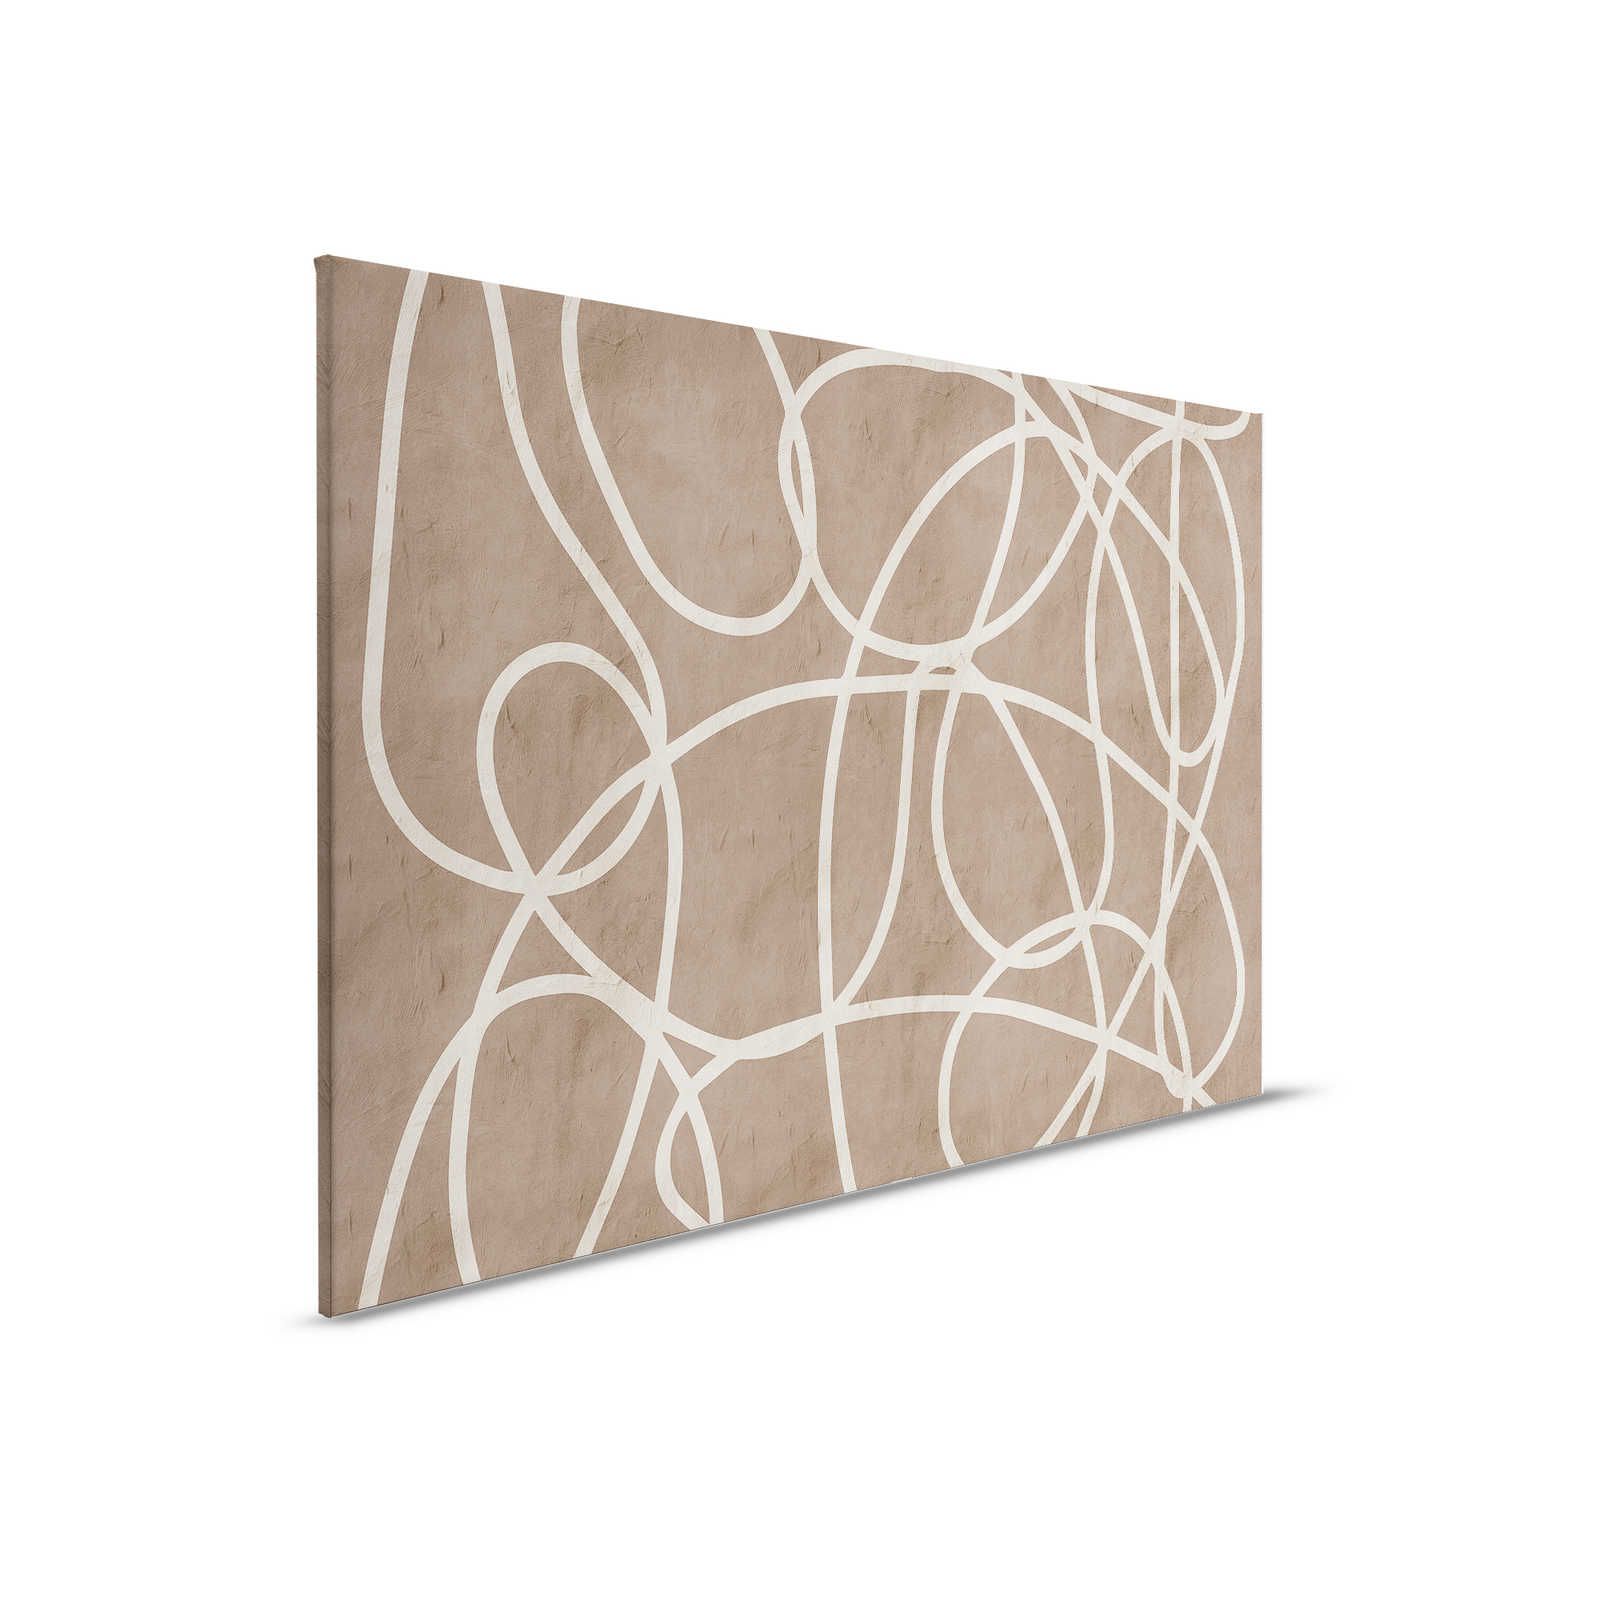         Serengeti 3 - Canvas painting Brown-Beige Clay Wall with Lines Design - 0,90 m x 0,60 m
    